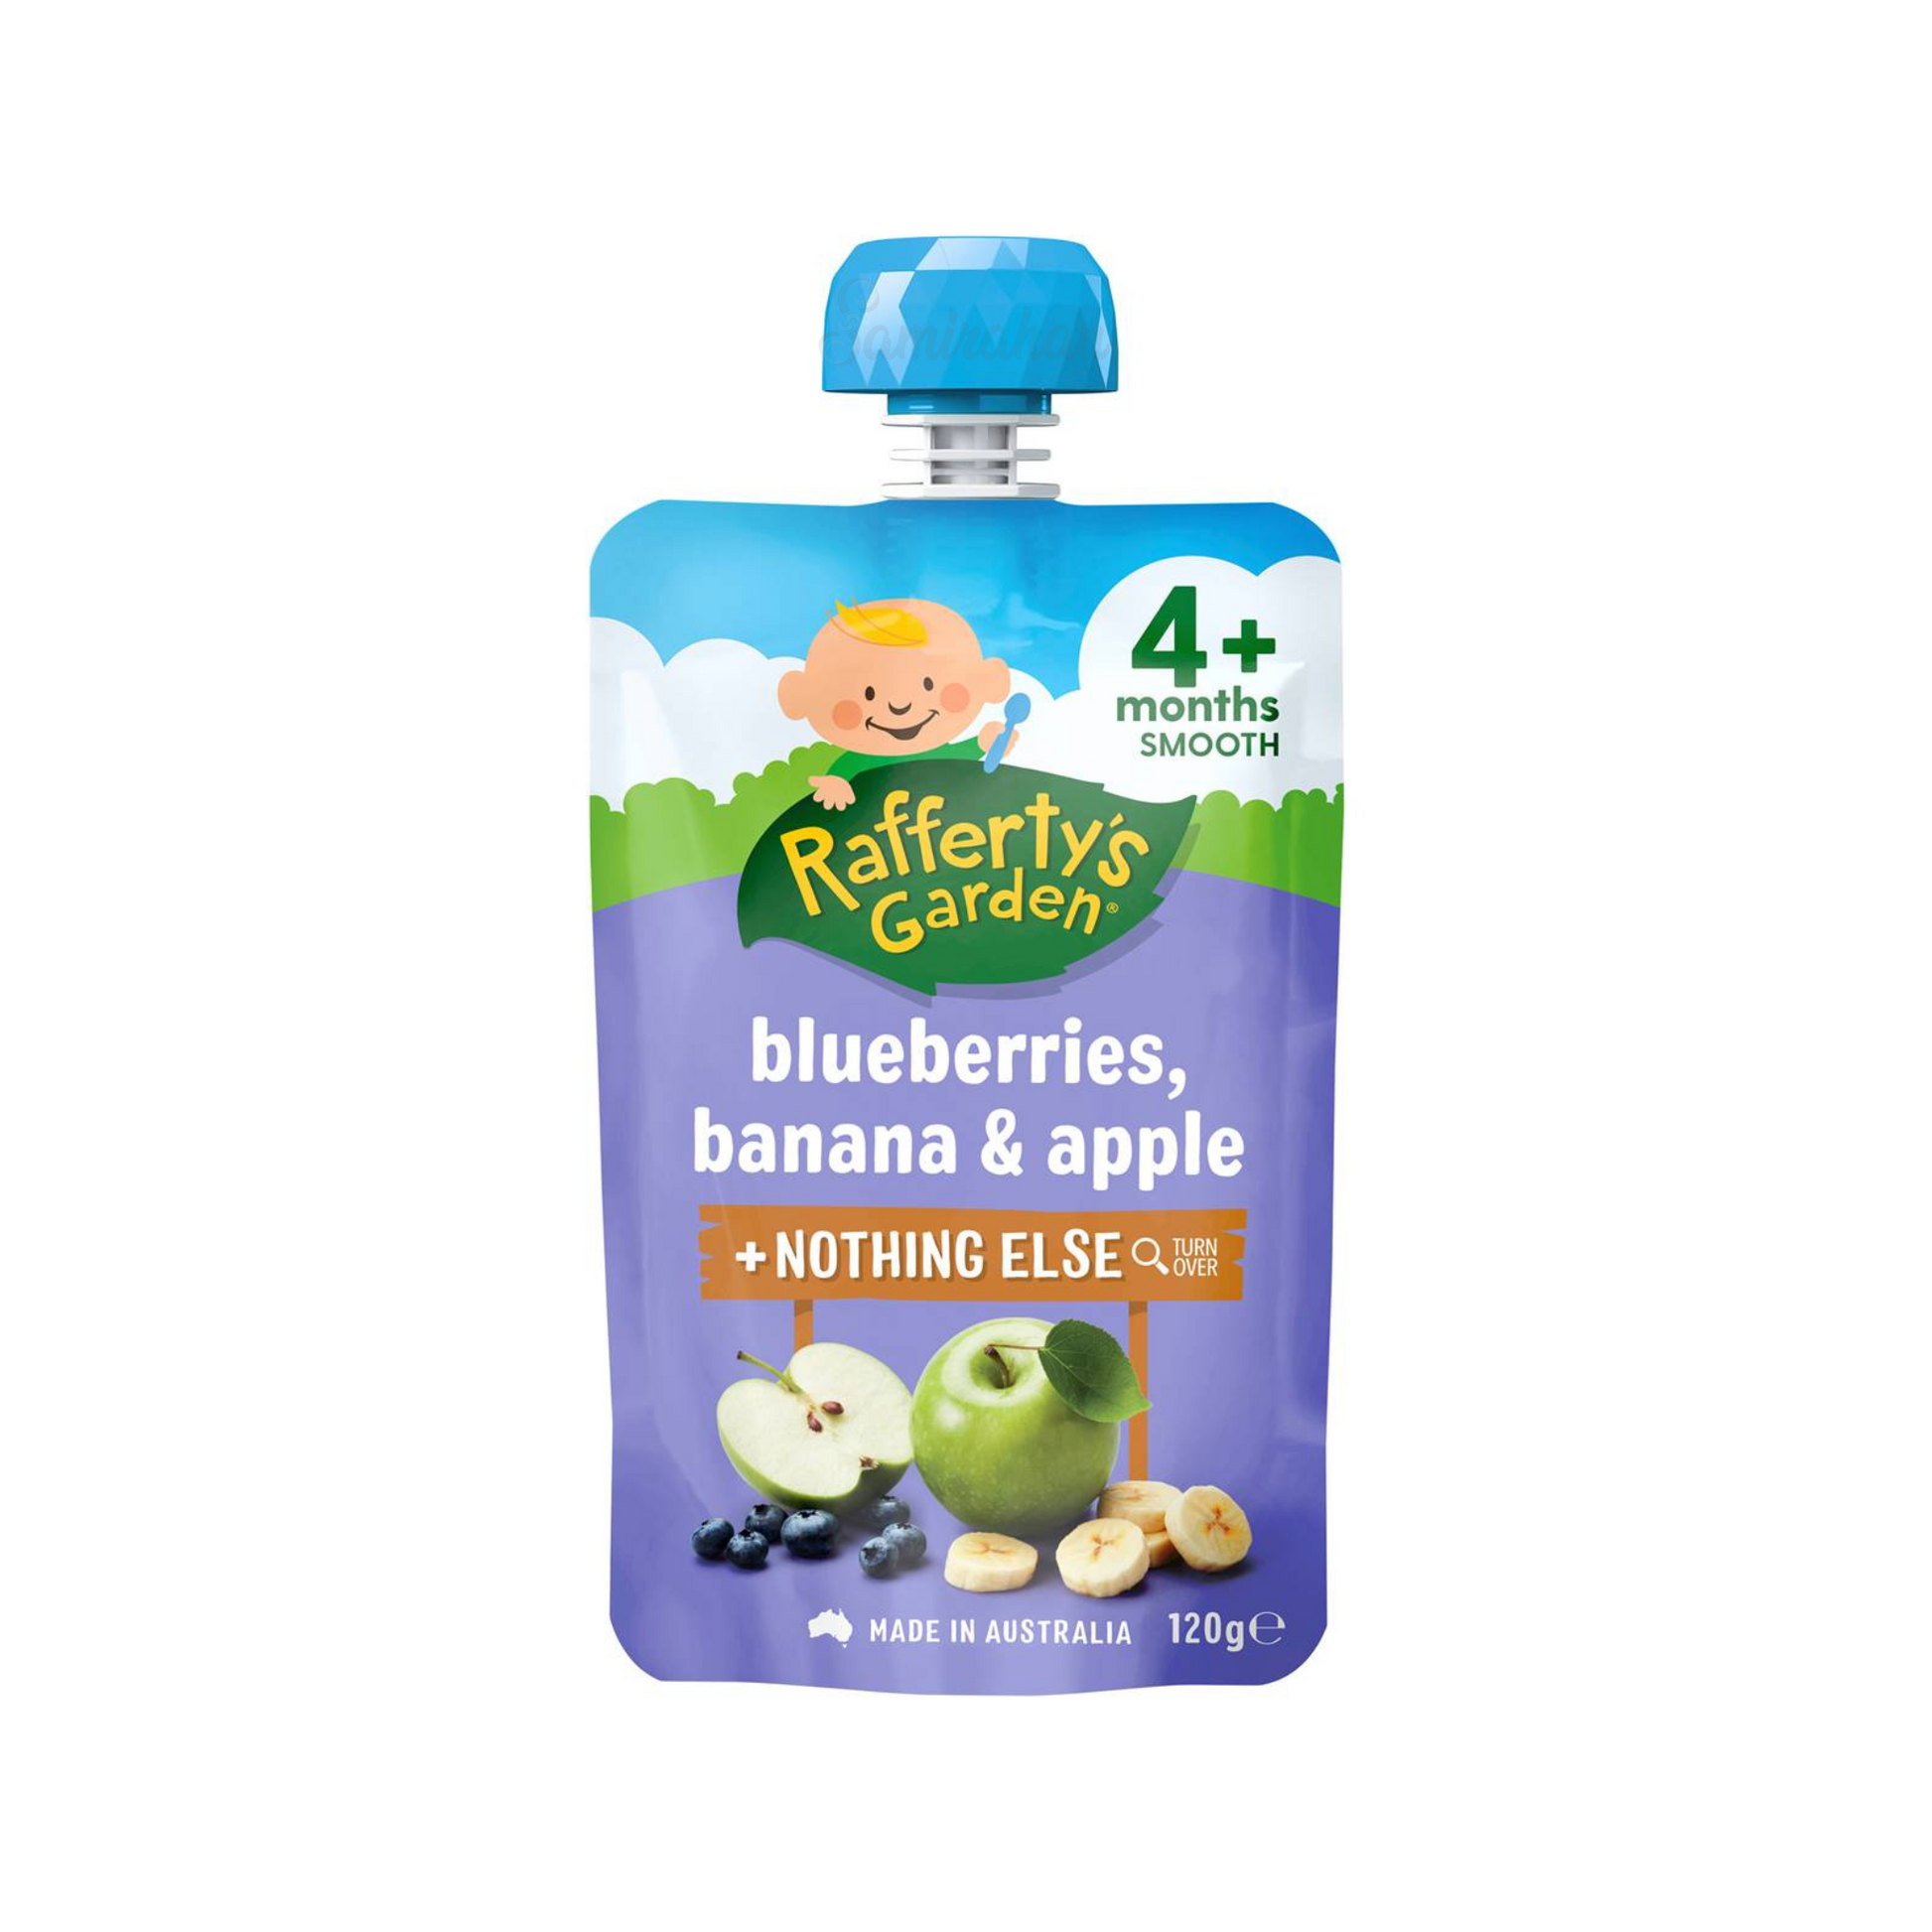 Rafferty's Garden Blueberries, Banana & Apple Baby Food Pouch 4+ Months is made from premium Australian fruits & vegetables. No artificial colour or flavors. Halal certified. Best imported foreign Australian Aussie genuine authentic premium quality real child snack healthy price in Dhaka Chittagong Sylhet Bangladesh.